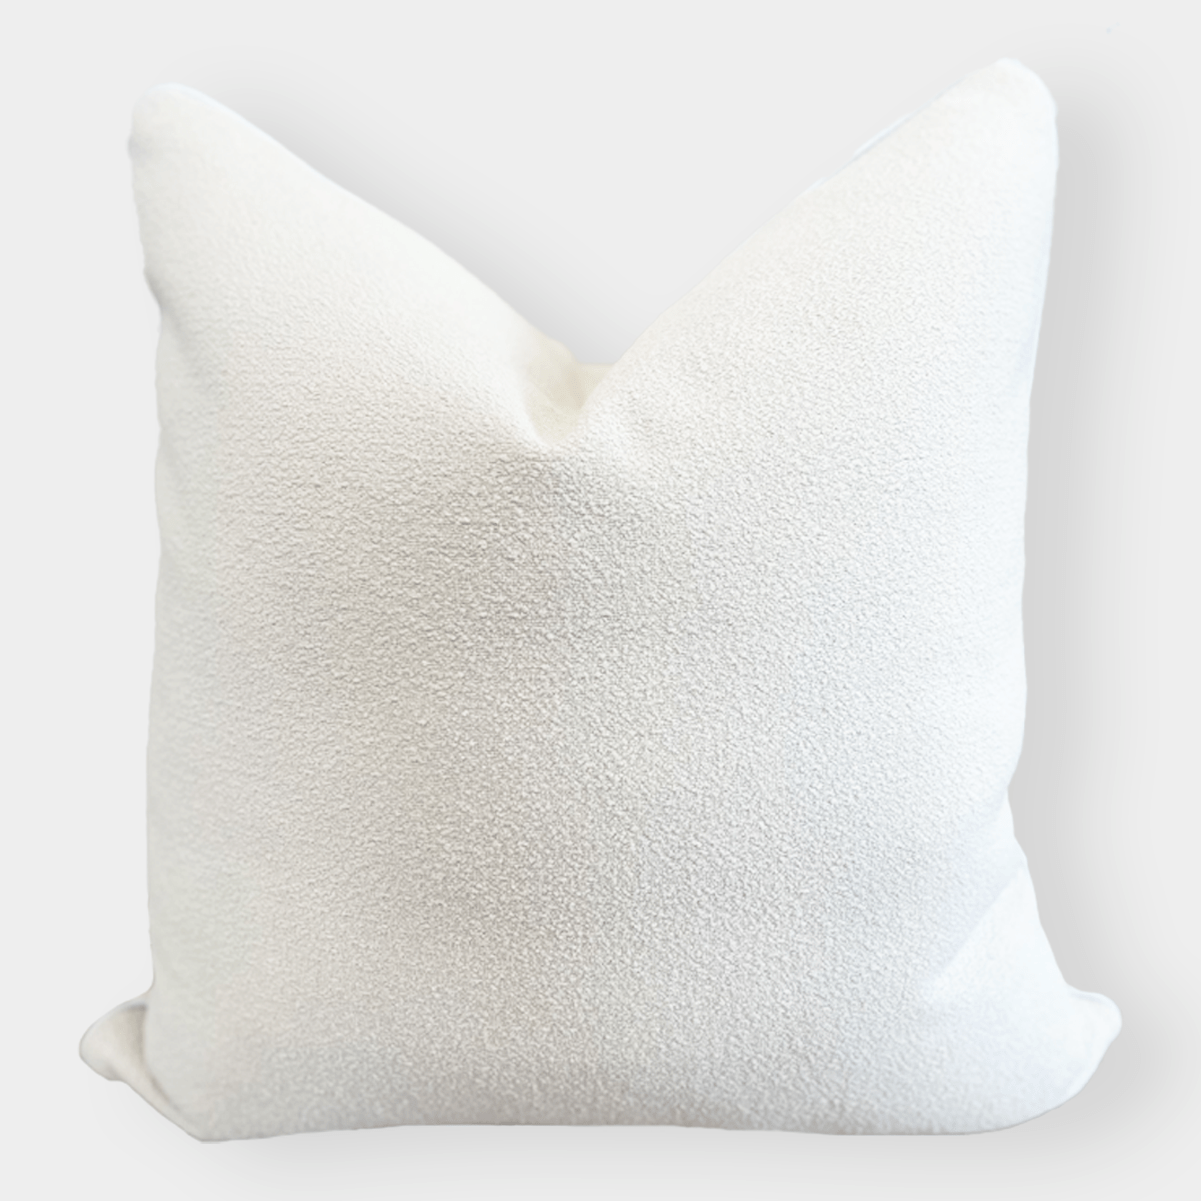 norsuHOME Cushions norsuHOME Summer Bouclé Cushion - White (7868922757369)